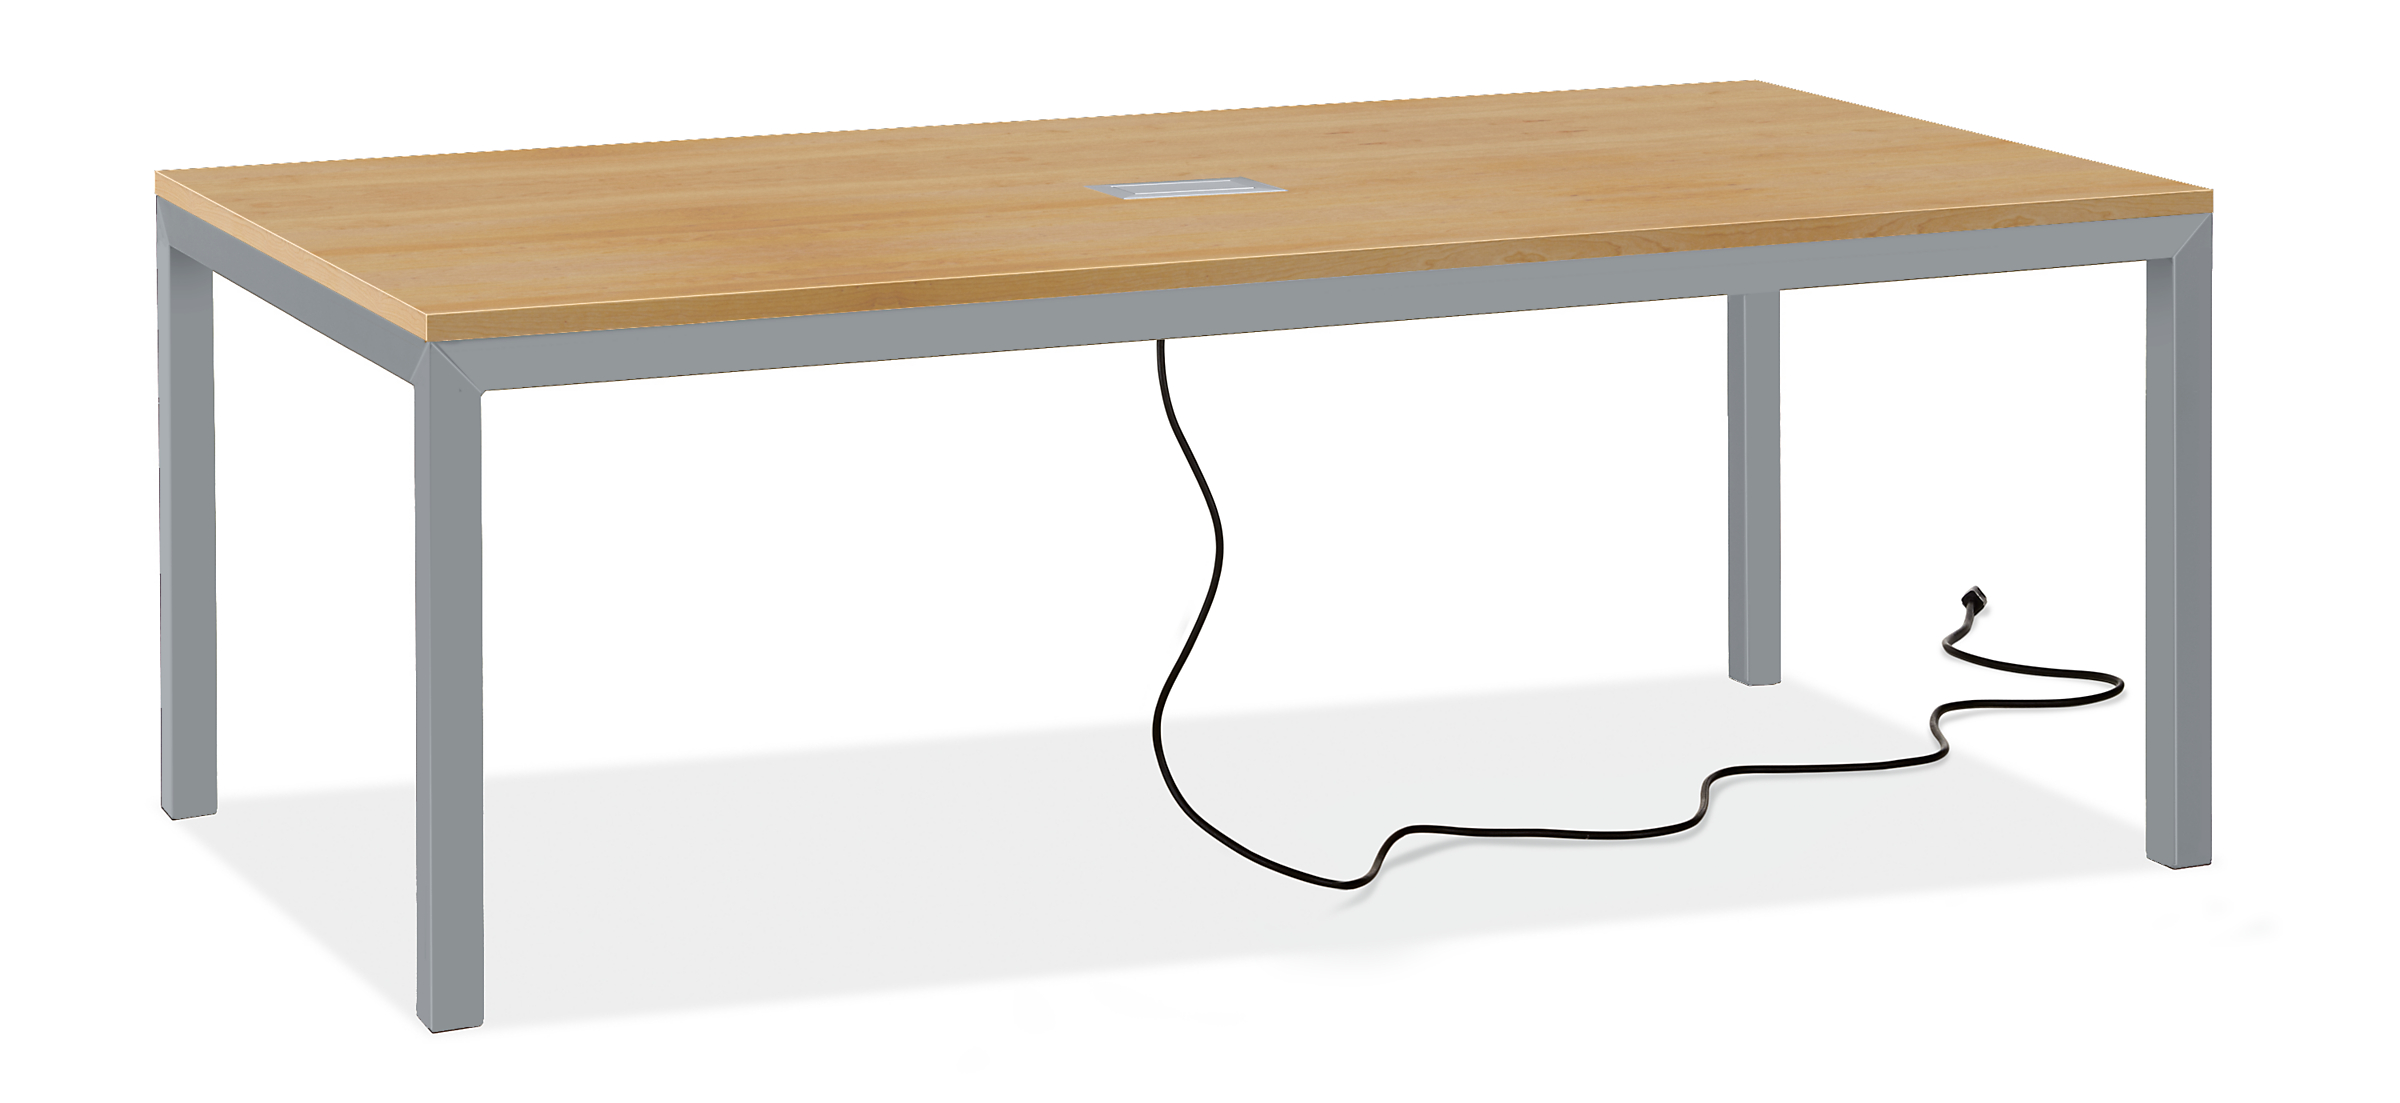 Parsons 78w 42d Table with Tabletop 3-Port Power/Charging Outlet & 2" Leg